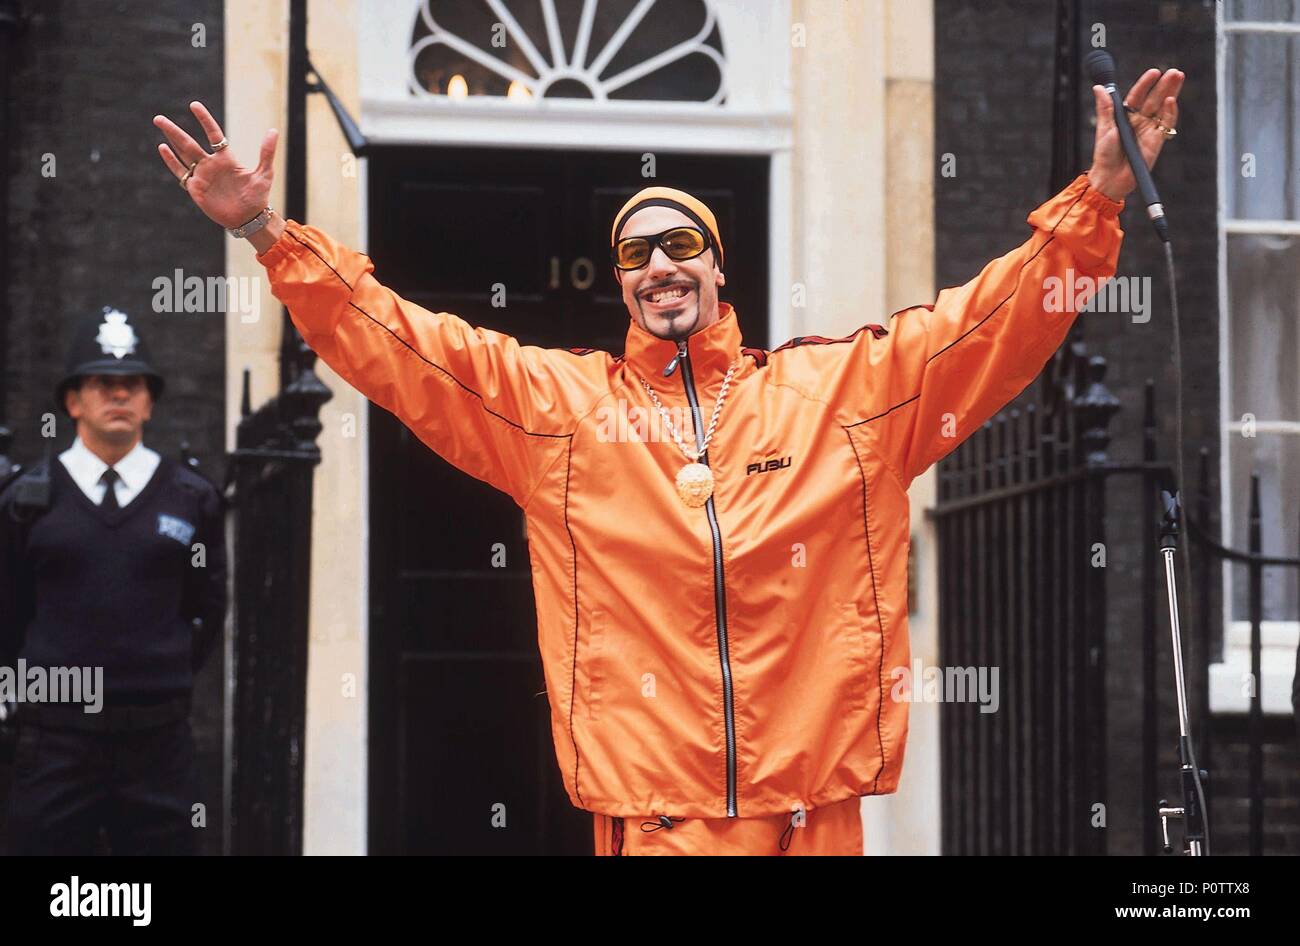 SACHA BARON COHEN in ALI G INDAHOUSE, 2002, directed by MARK MYLOD.  Copyright WORKING TITLE FILMS/TALKBACK PRODUCTIONS/FILMFOUR/WT2. - Album  alb378242